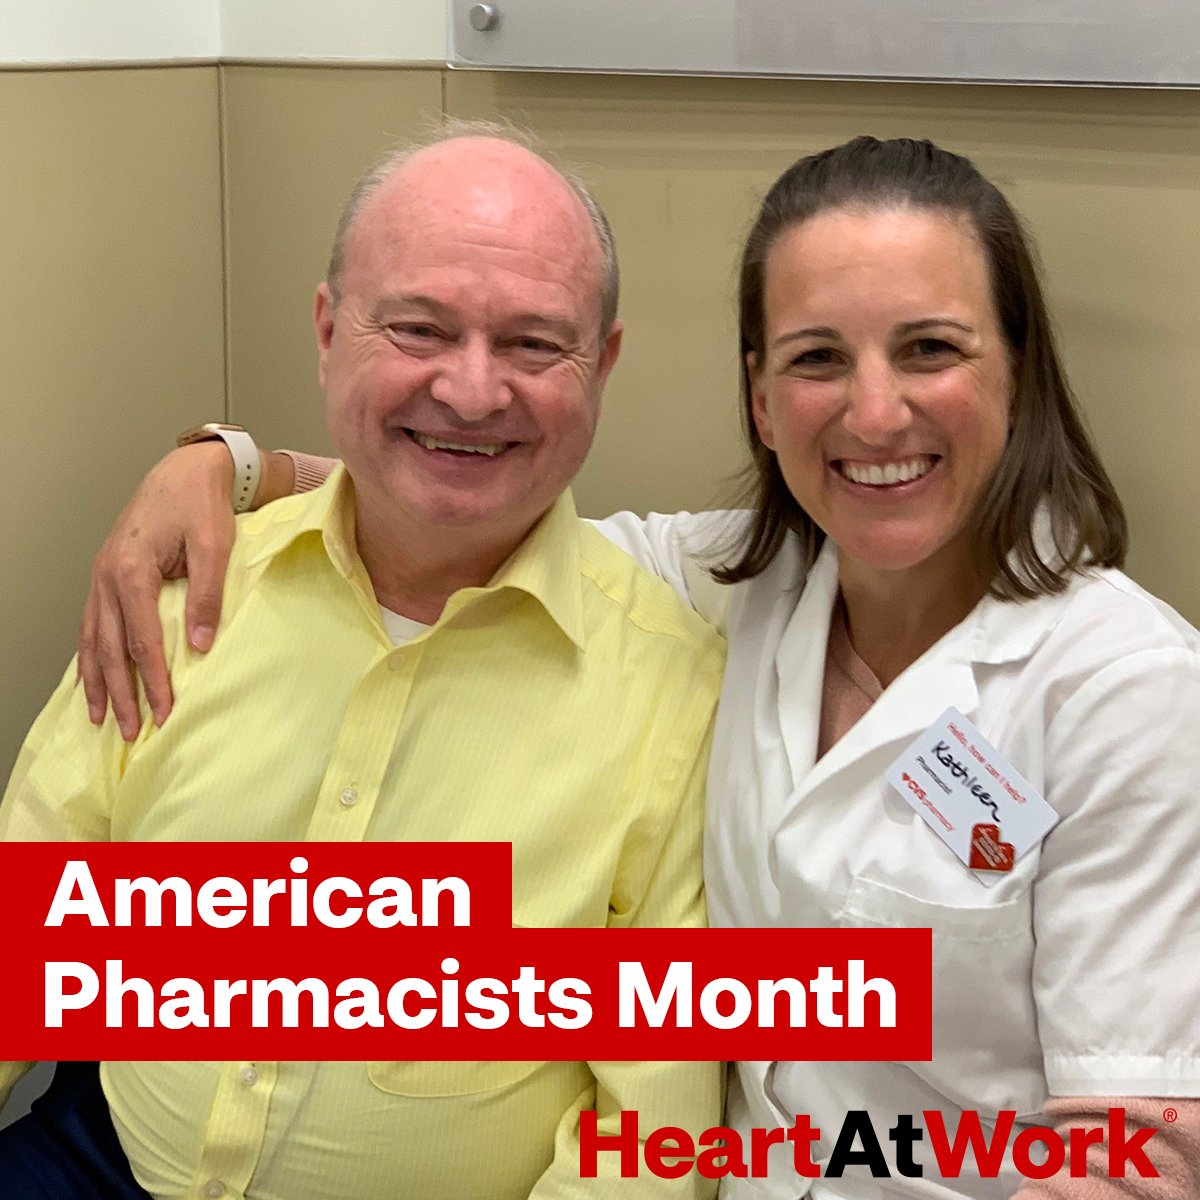 This #AmericanPharmacistsMonth, join us in recognizing our incredible pharmacists like Kathleen Kirkland, who donated her kidney to a patient in need. Kathleen, thank you for this incredible gift and going above and beyond for your patient. #CVSHeartAtWork cvs.co/3DQtHhE